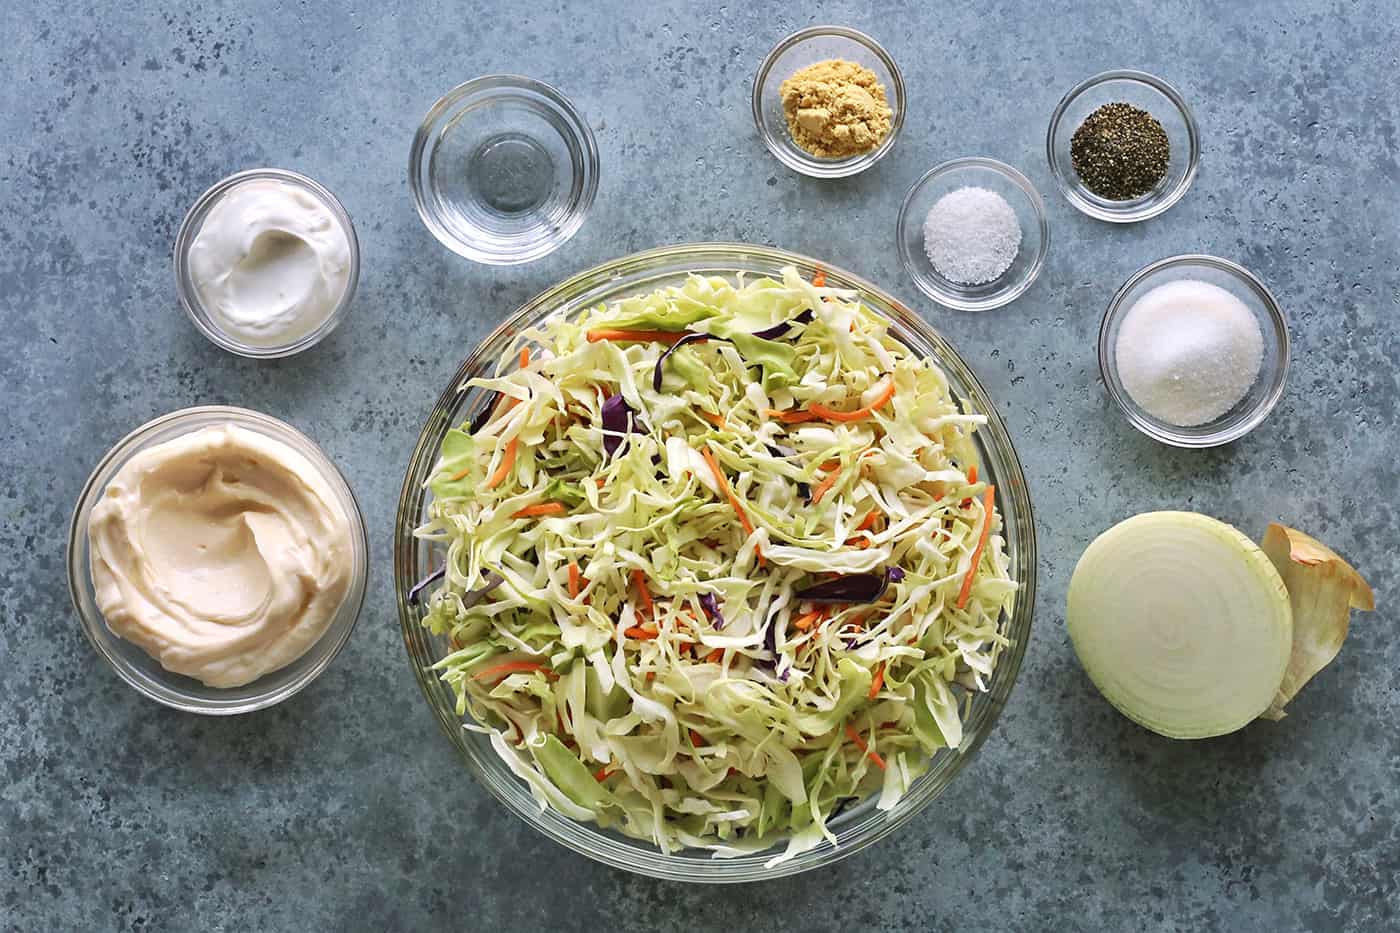 coleslaw ingredients in clear bowls: shredded cabbage, mayonnaise, sour cream, vinegar, ground mustard, salt, pepper, sugar, and half a yellow onion